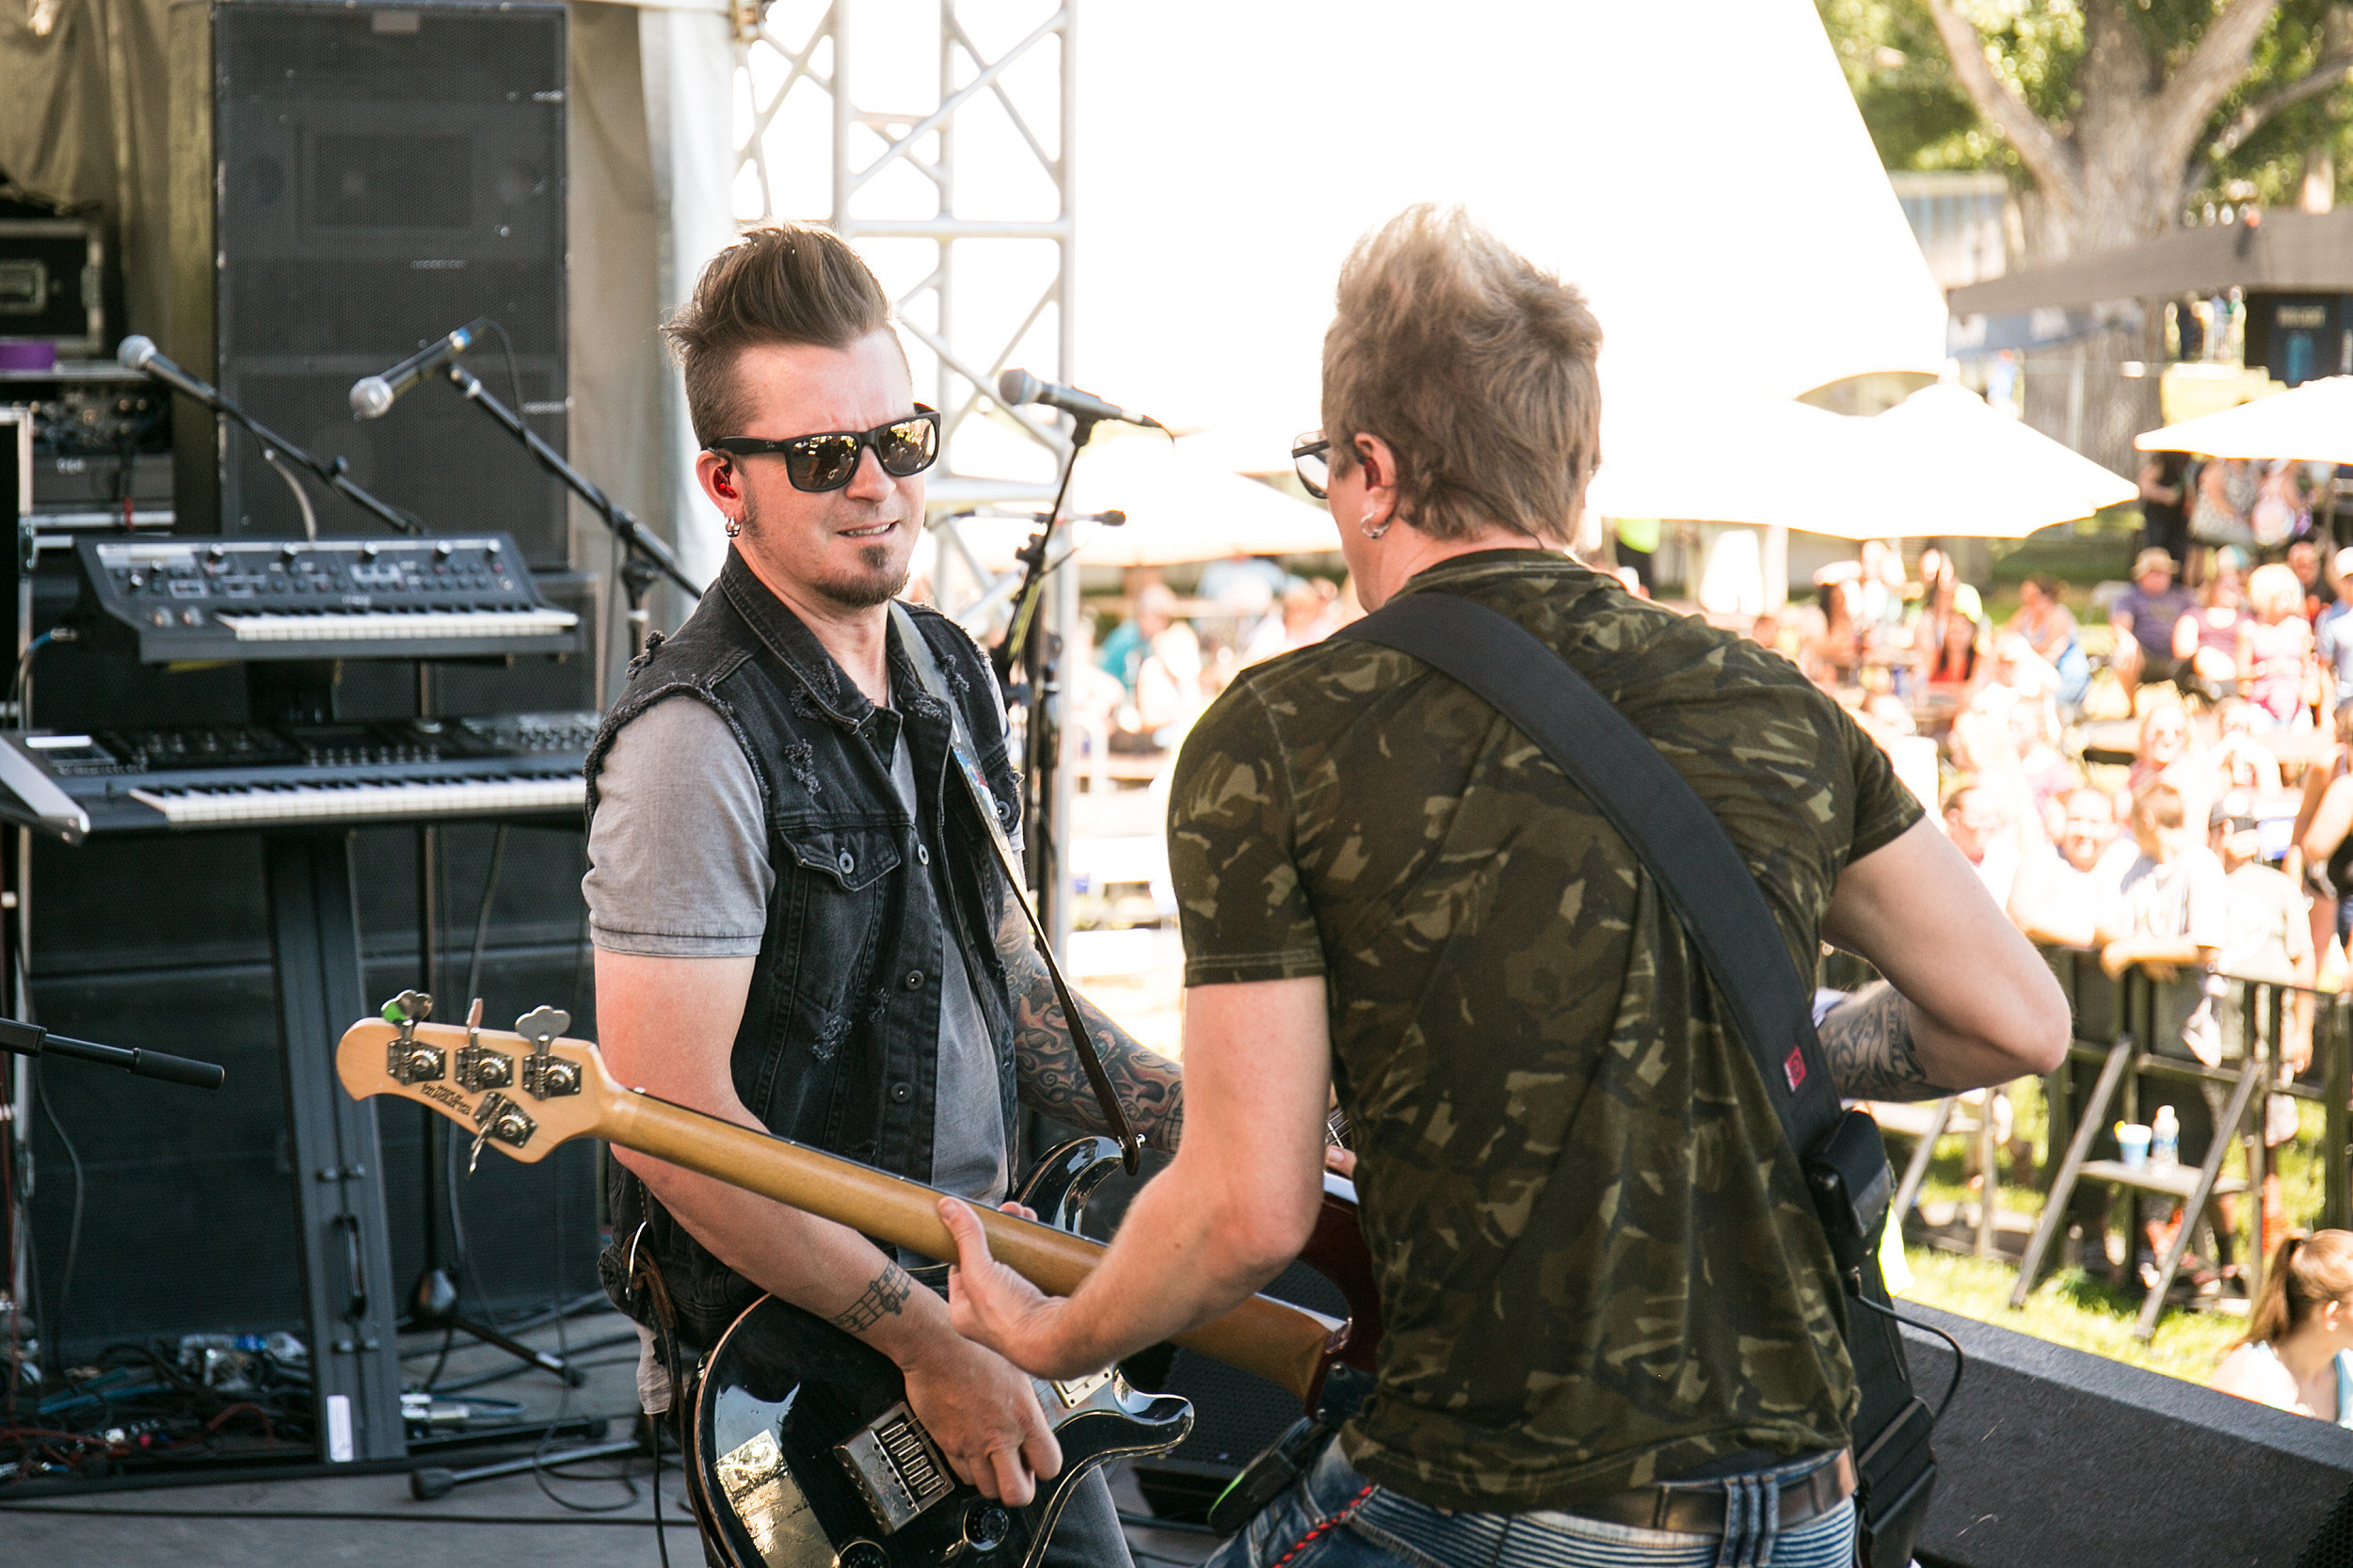 Parmalee band, Live performance photos, Onstage energy, 2500x1670 HD Desktop